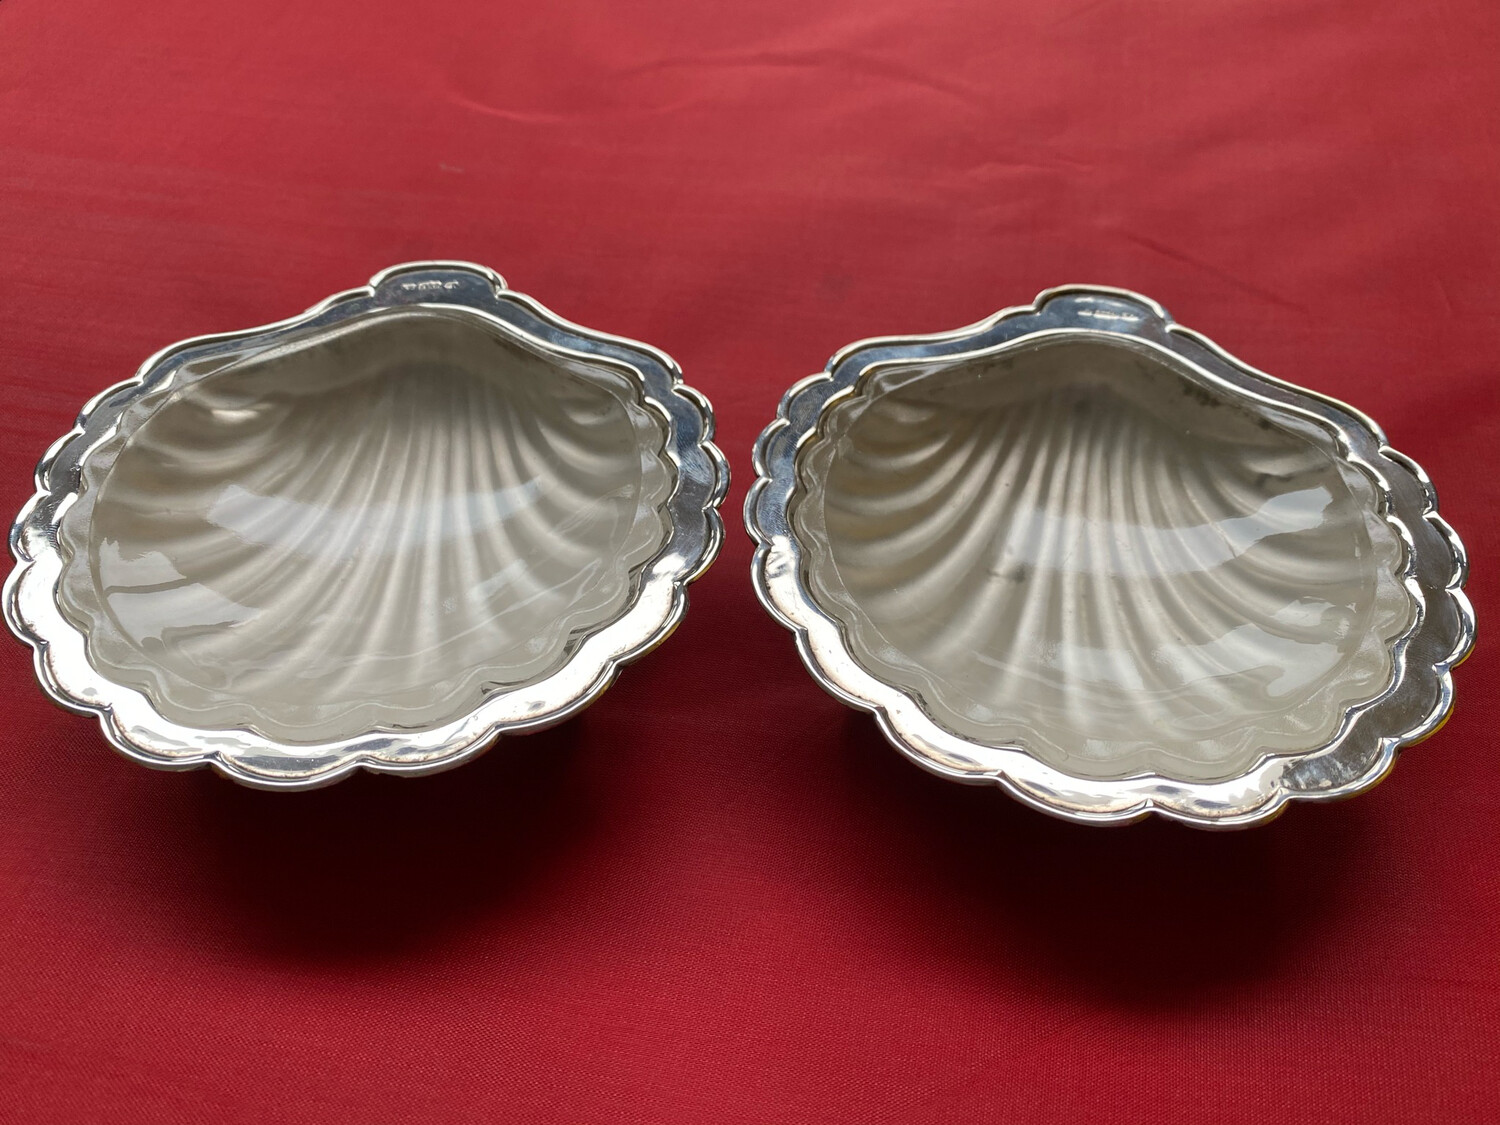 Pair Of Silver Plated Scallop Dishes With Glass Liners - Circa Late 1800’s